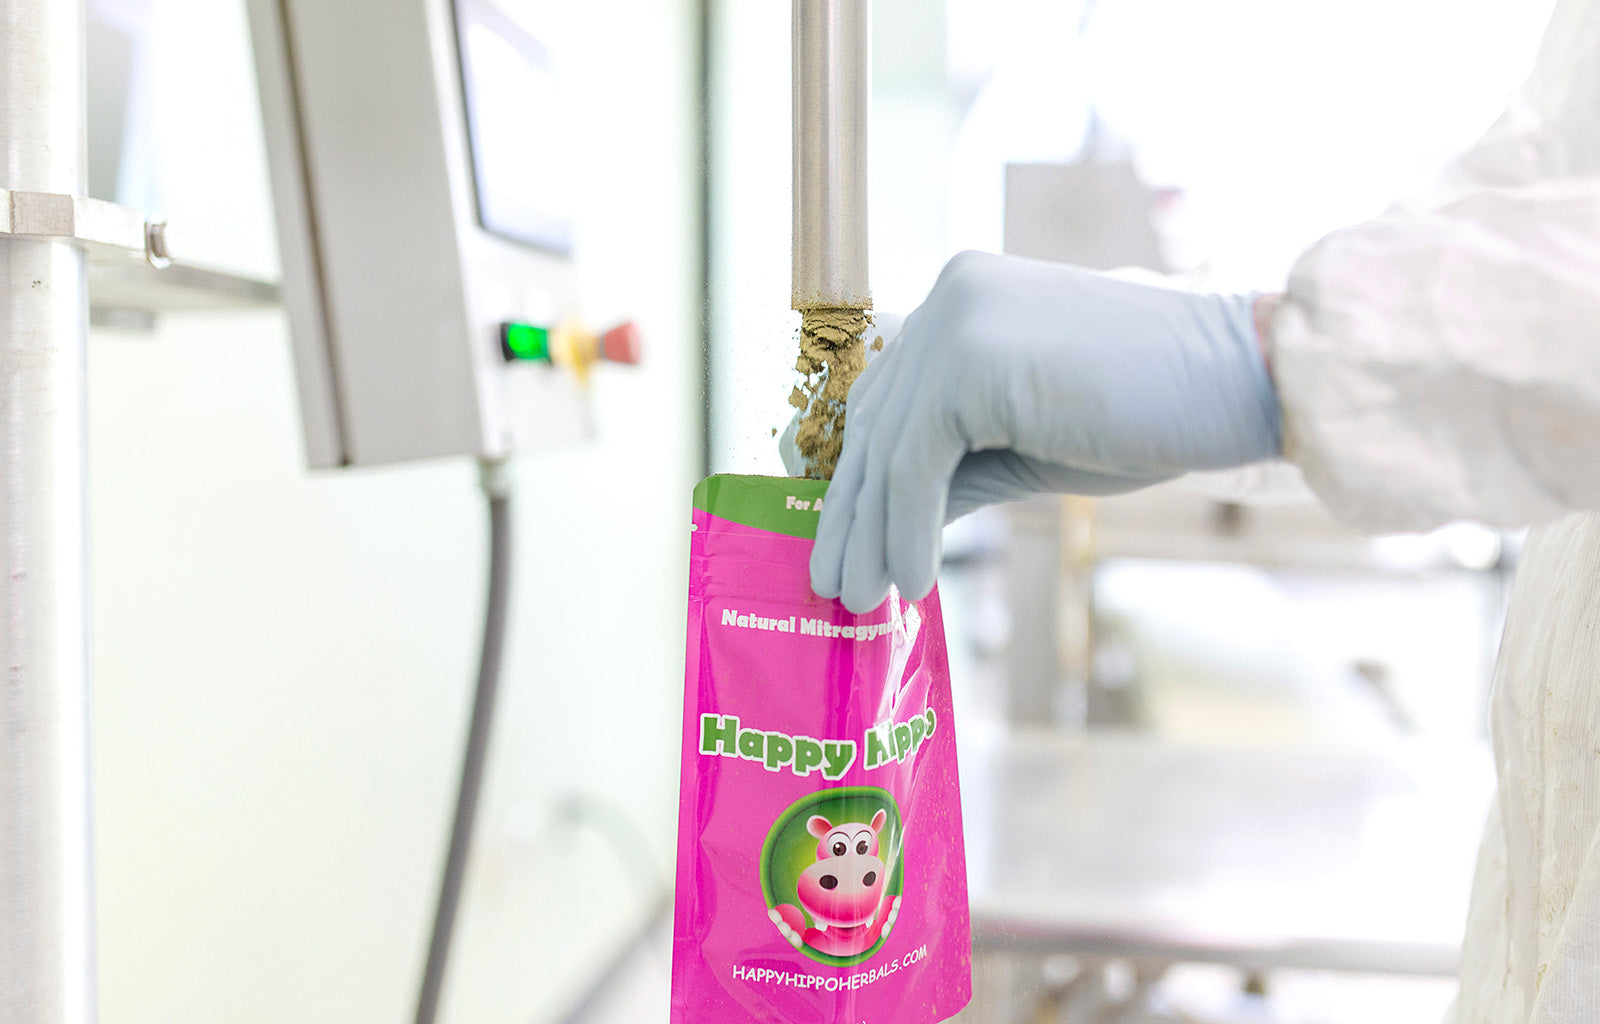 Featured image of a Happy Hippo branded packet of Green Maeng Da kratom powder, being filled from a machine in a sterile lab-like environment.